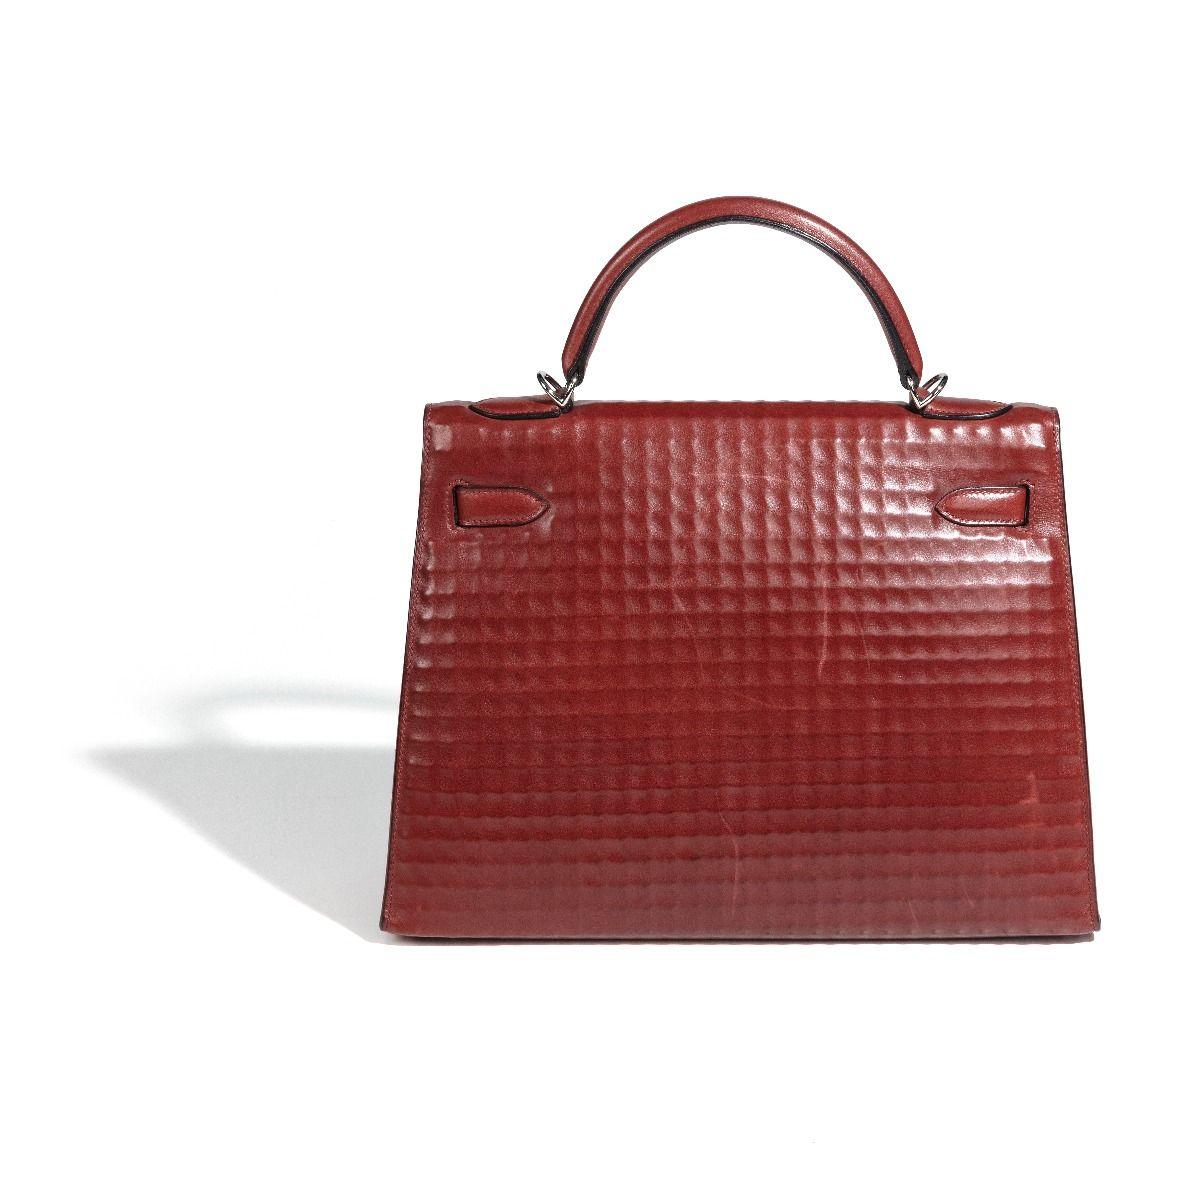 Named after Grace Kelly in 1977, the Kelly bag from Hermès became one of the most sought-after styles in the world. This pre-owned Hermes bag, in Sellier style, is crafted from leather and is finished in a waffle style. Featuring a trapeze-shaped